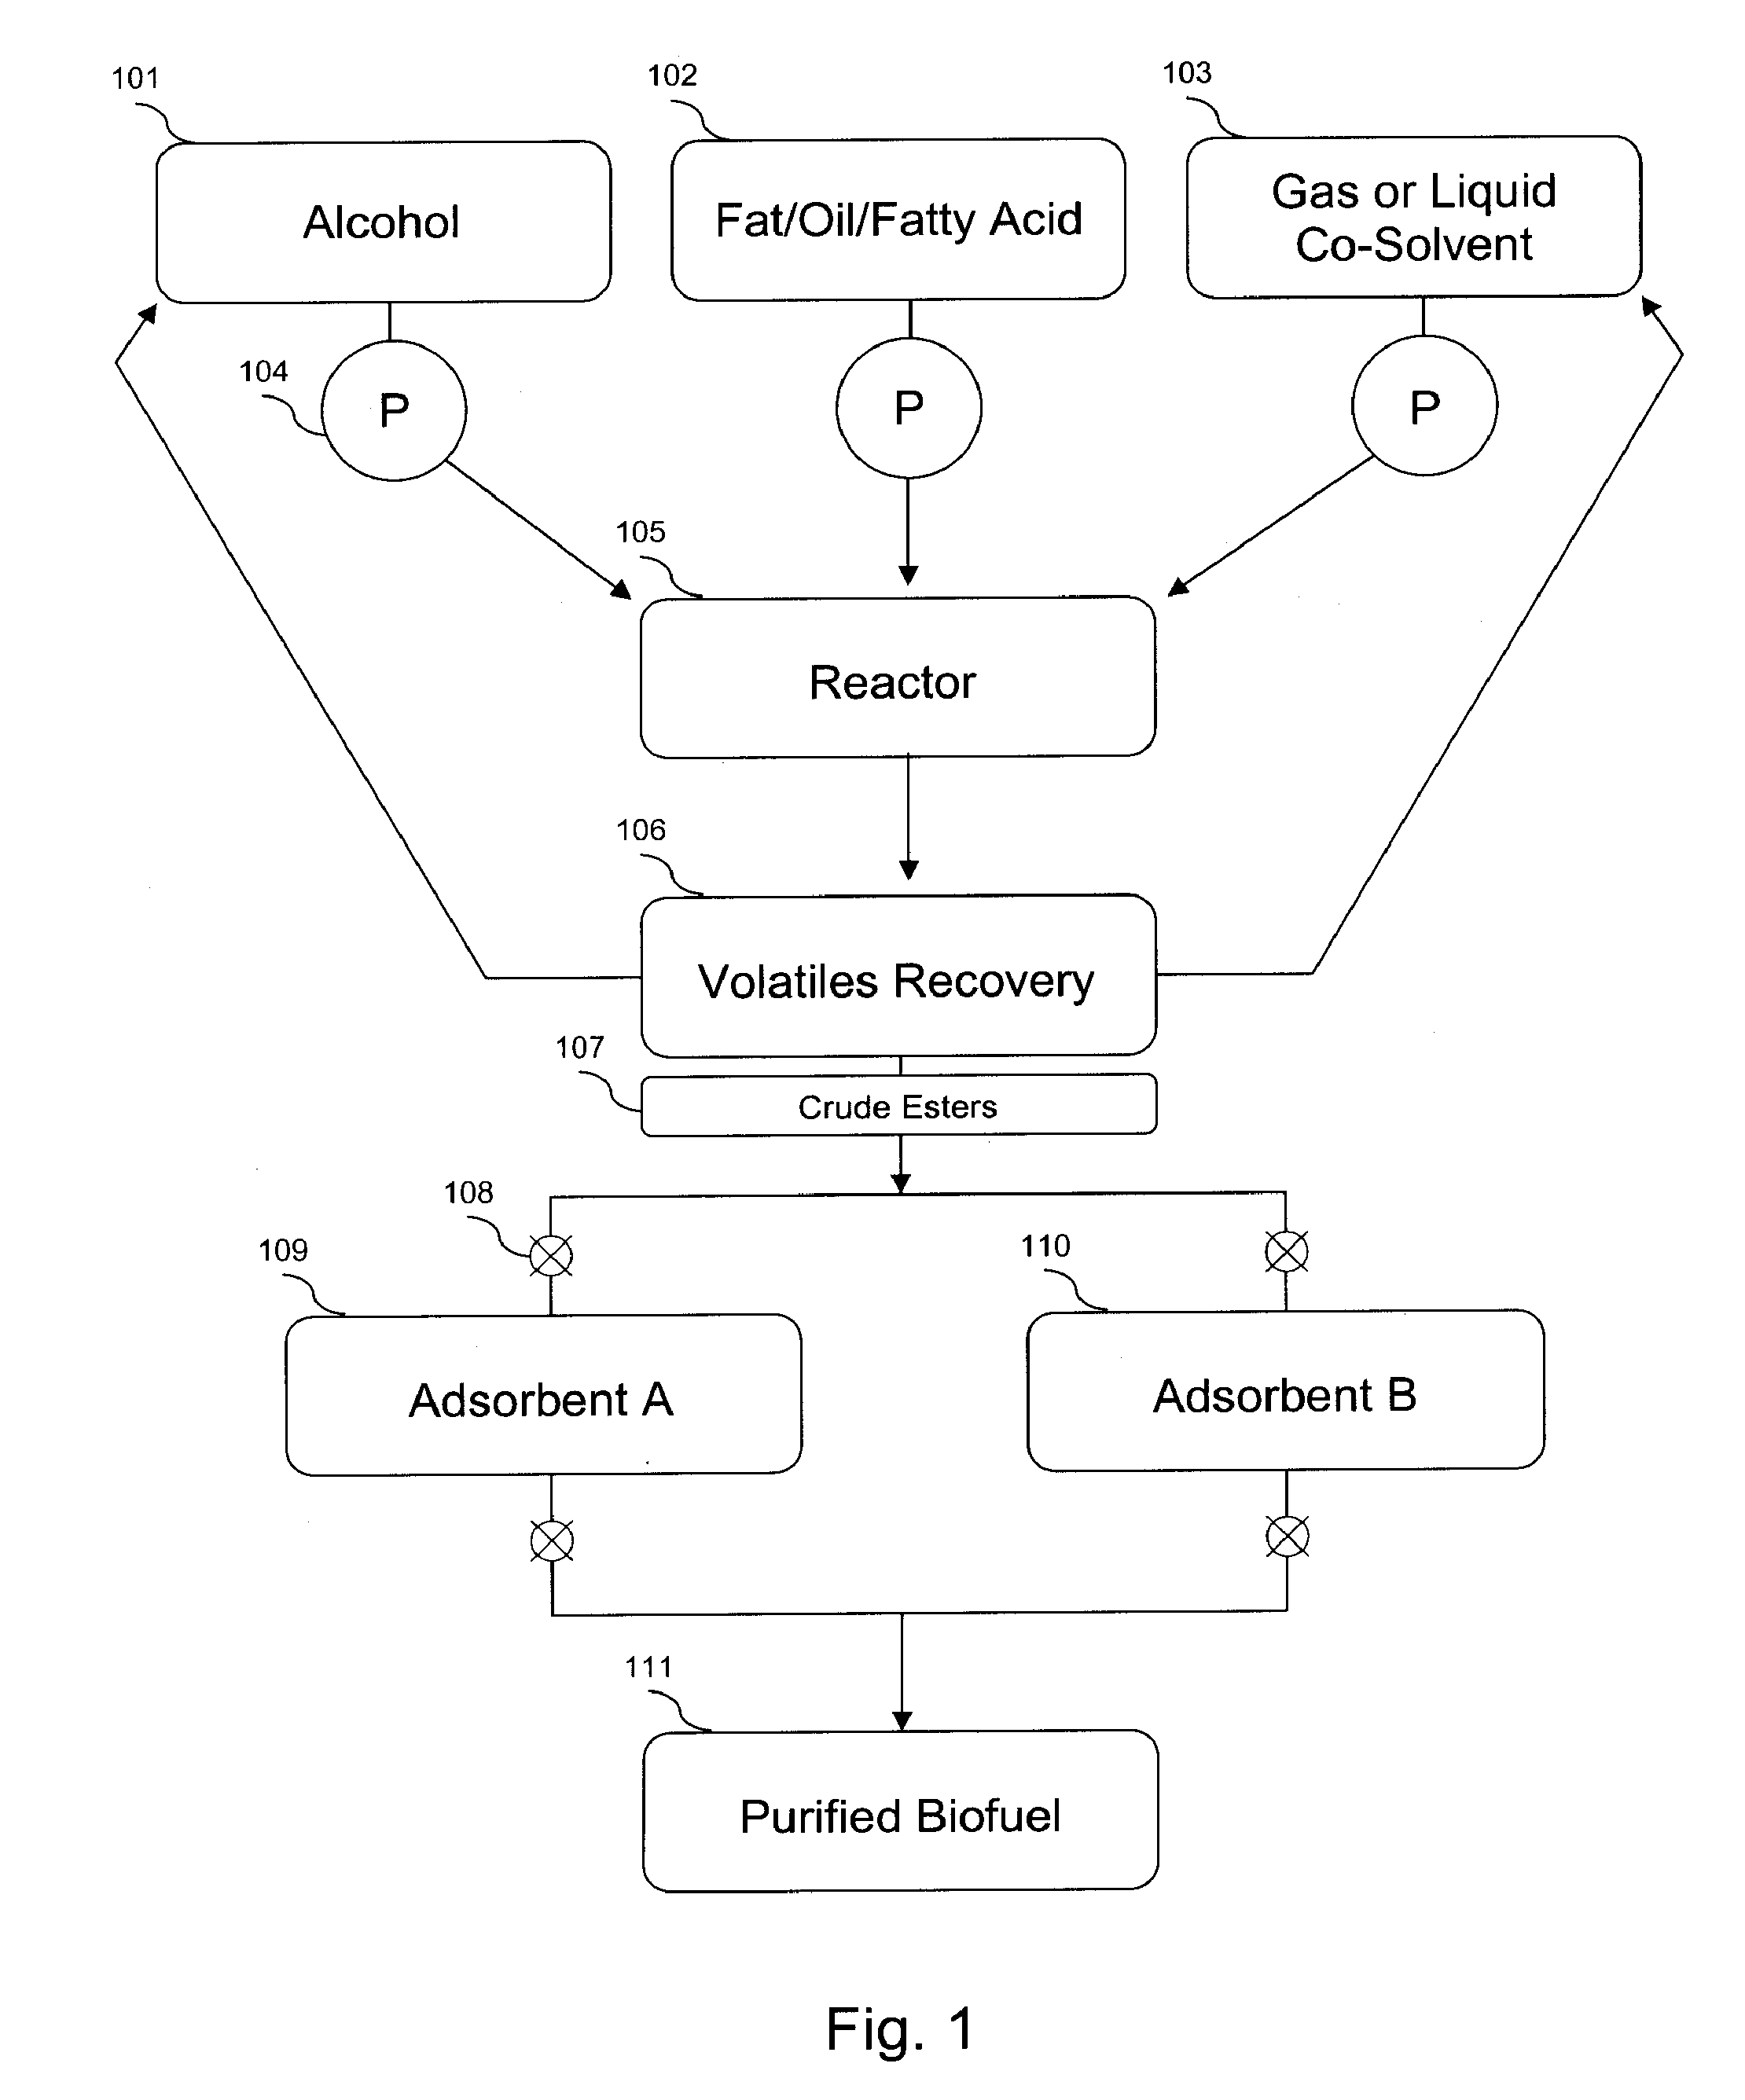 System for production and purification of biofuel